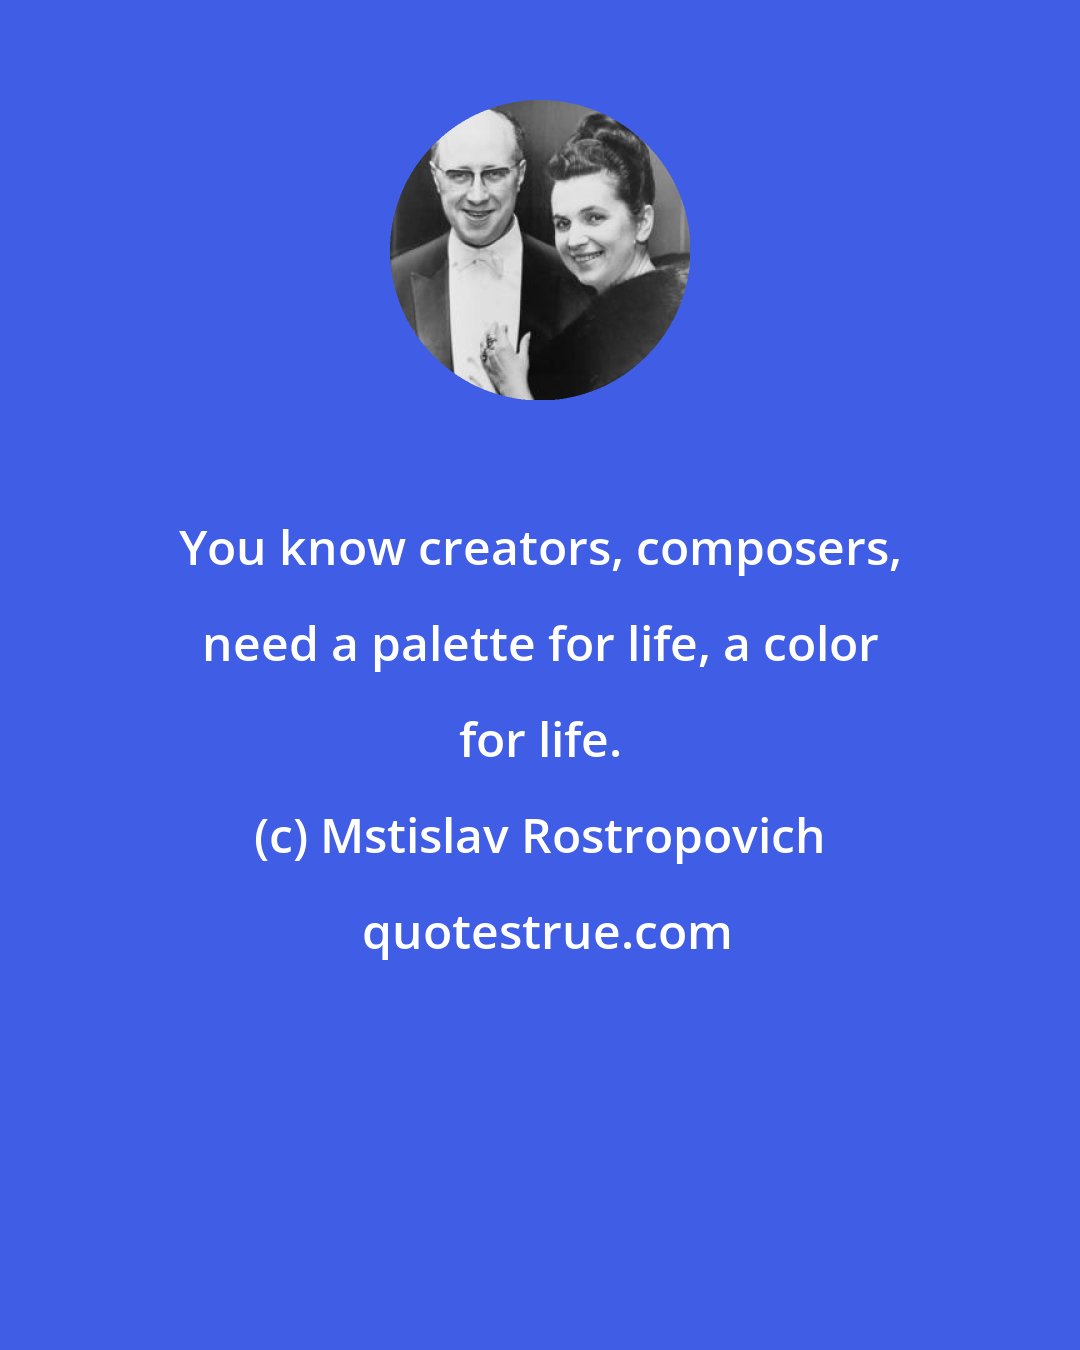 Mstislav Rostropovich: You know creators, composers, need a palette for life, a color for life.